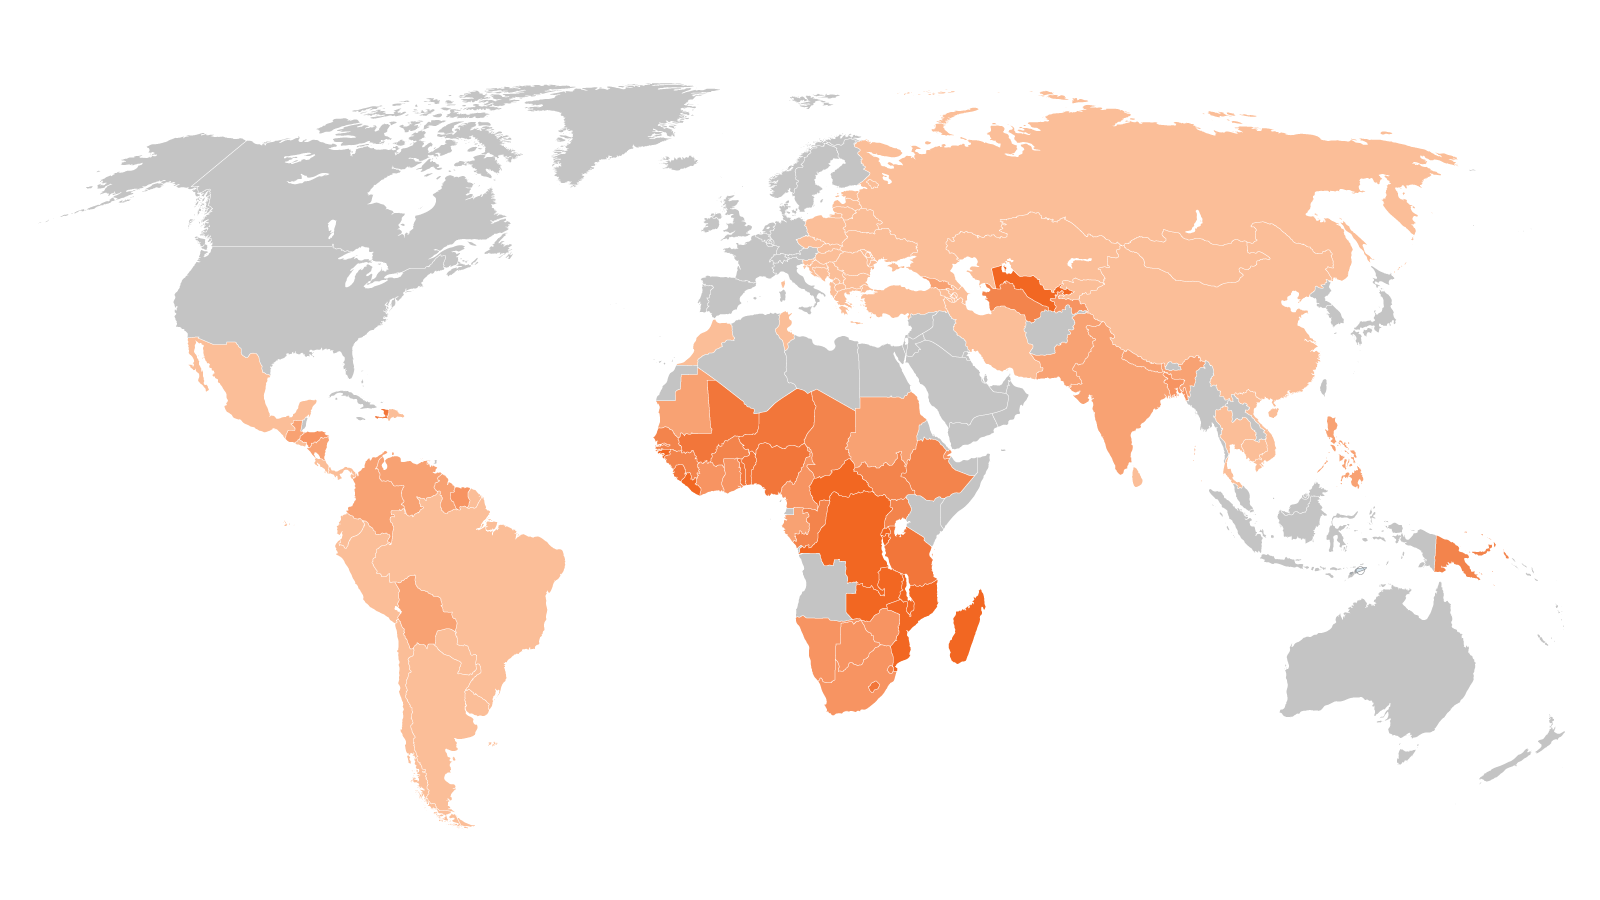 Blueprint to Solve Poverty, gray and orange world map. Darker orange countries have higher rates of extreme poverty. ©2016 World Vision